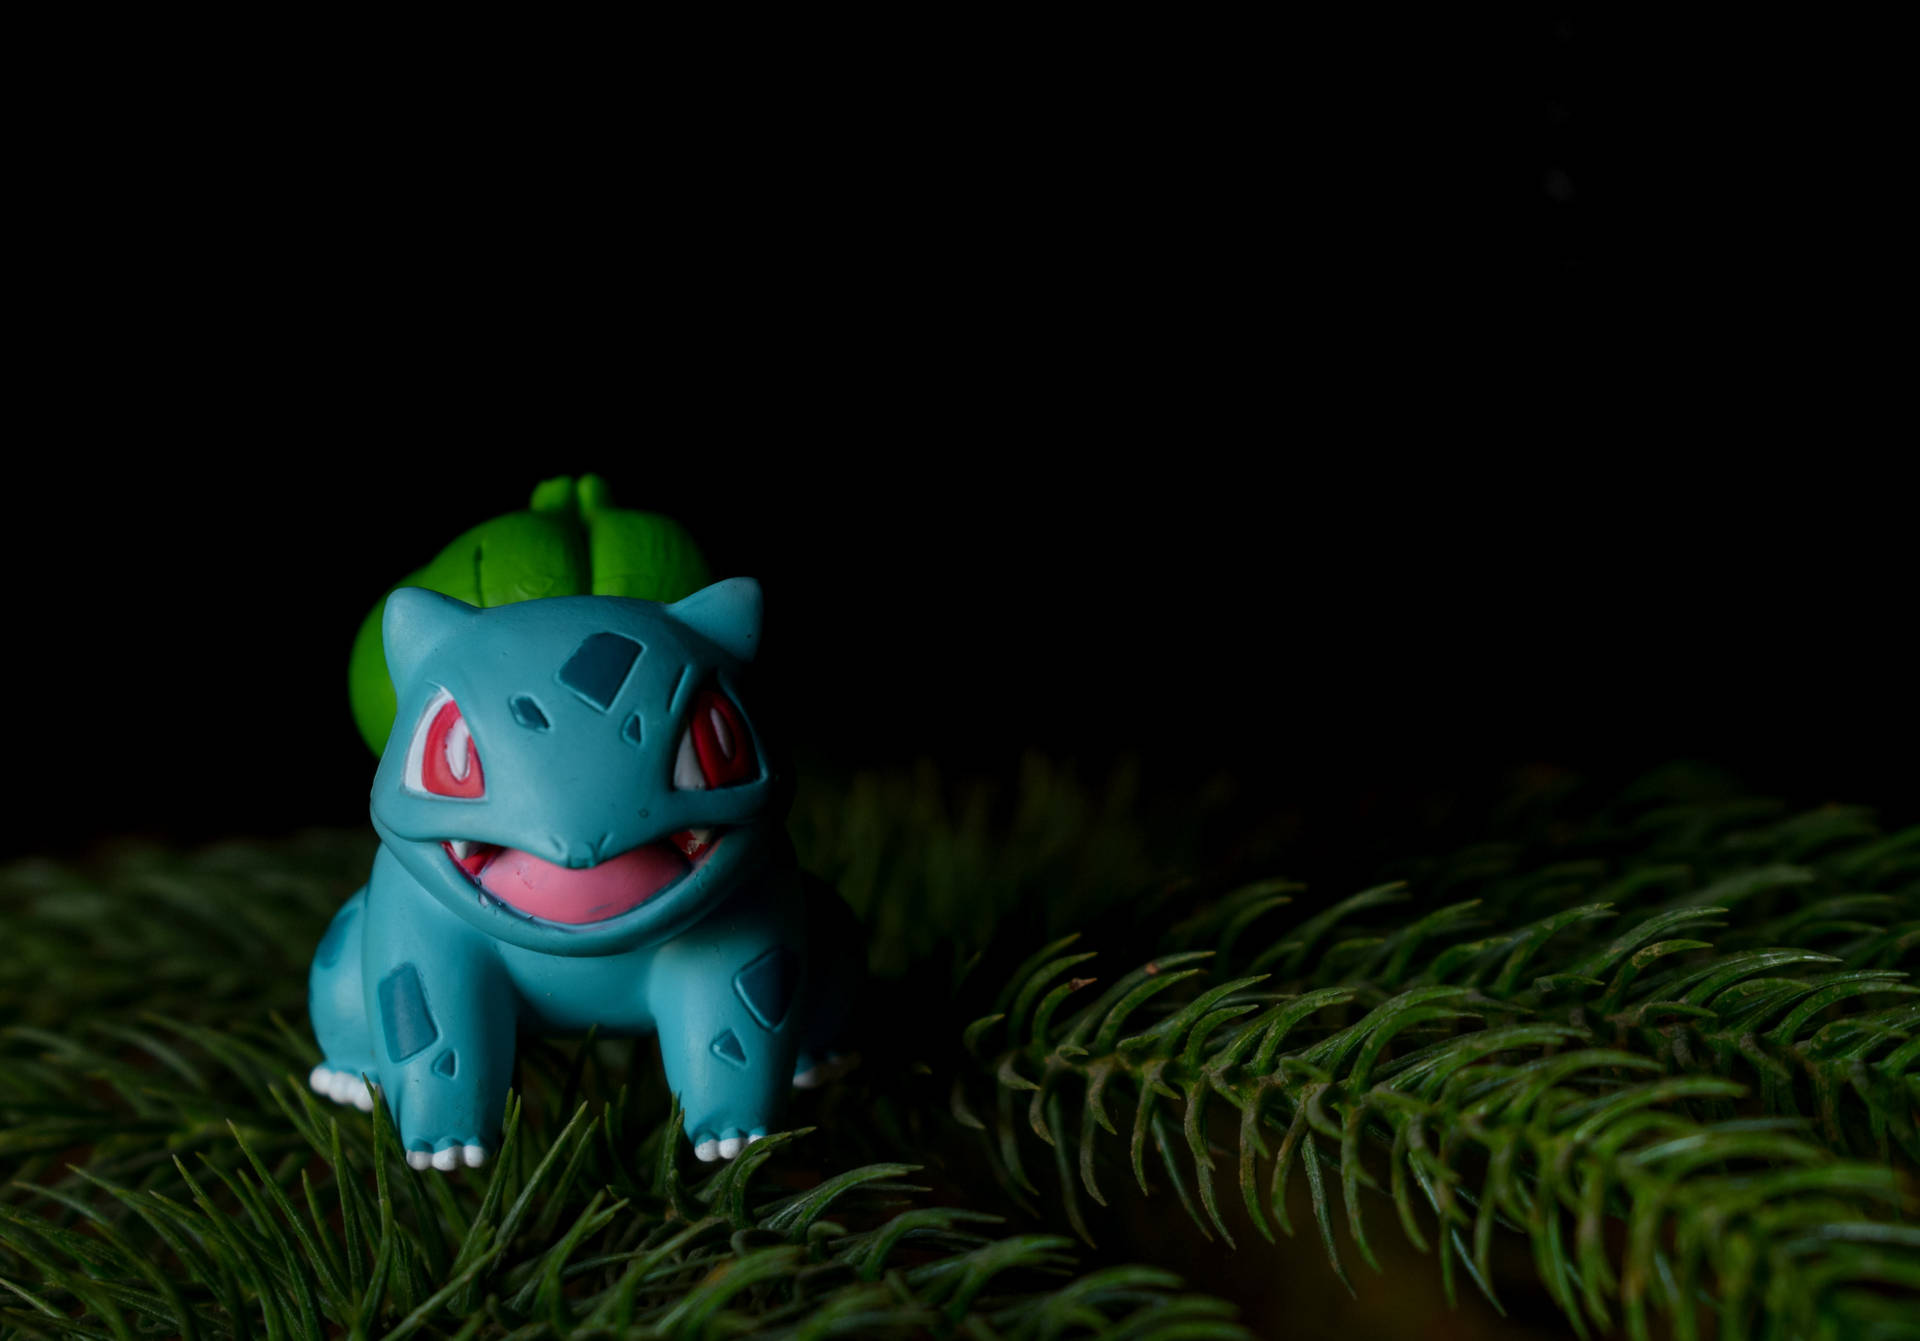 Bulbasaur Toy In Pine Background